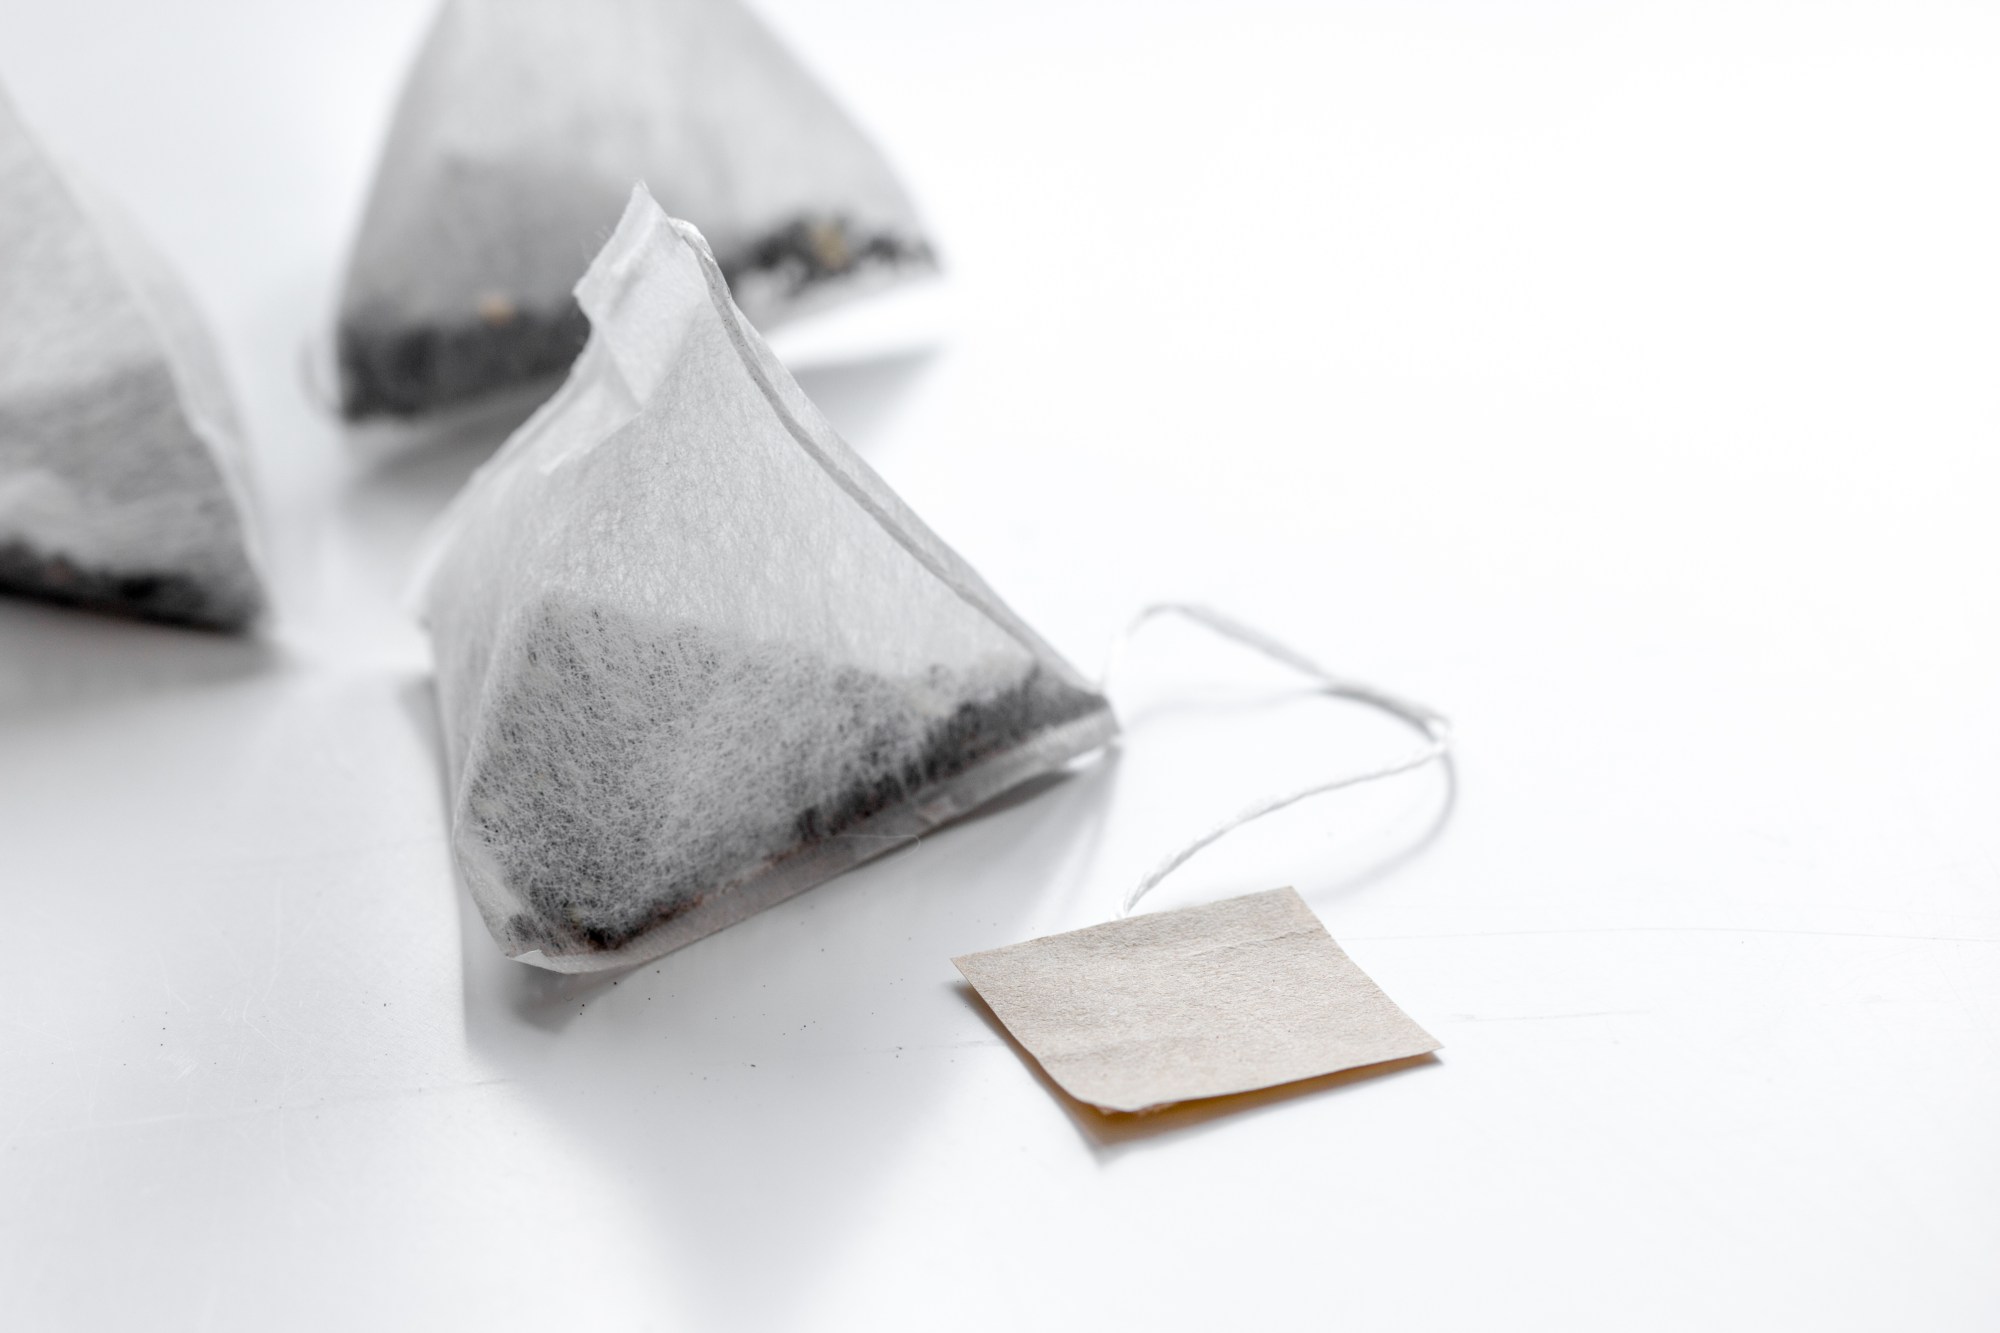 Plastic in Tea Bags: What You Need to Know